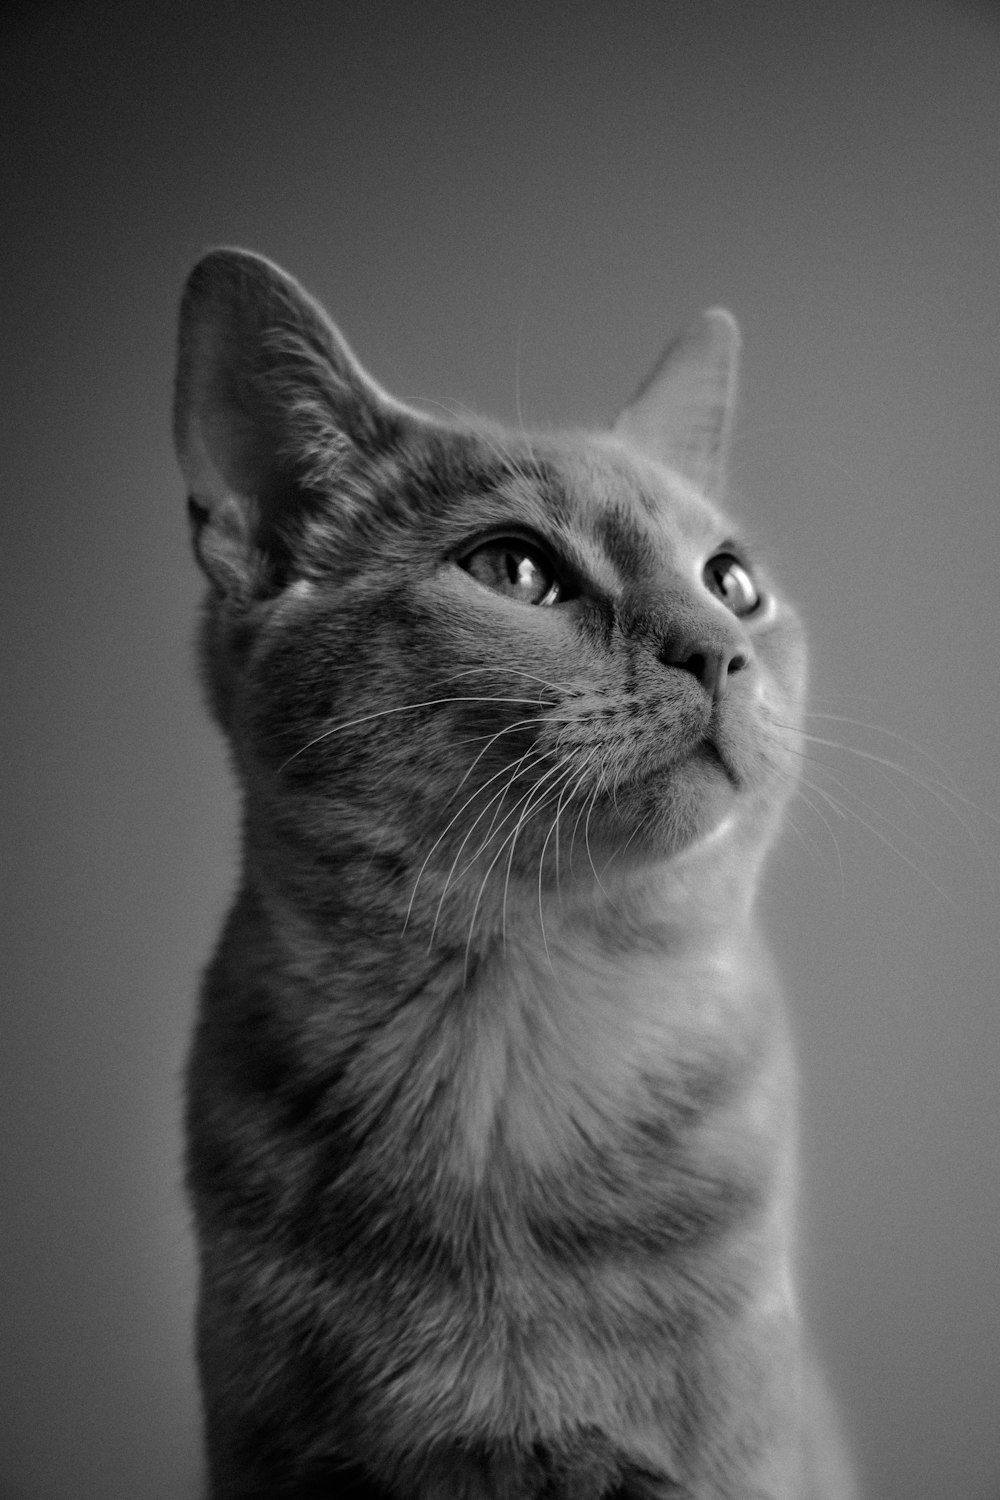 999+ Black And White Cat Pictures | Download Free Images on Unsplash